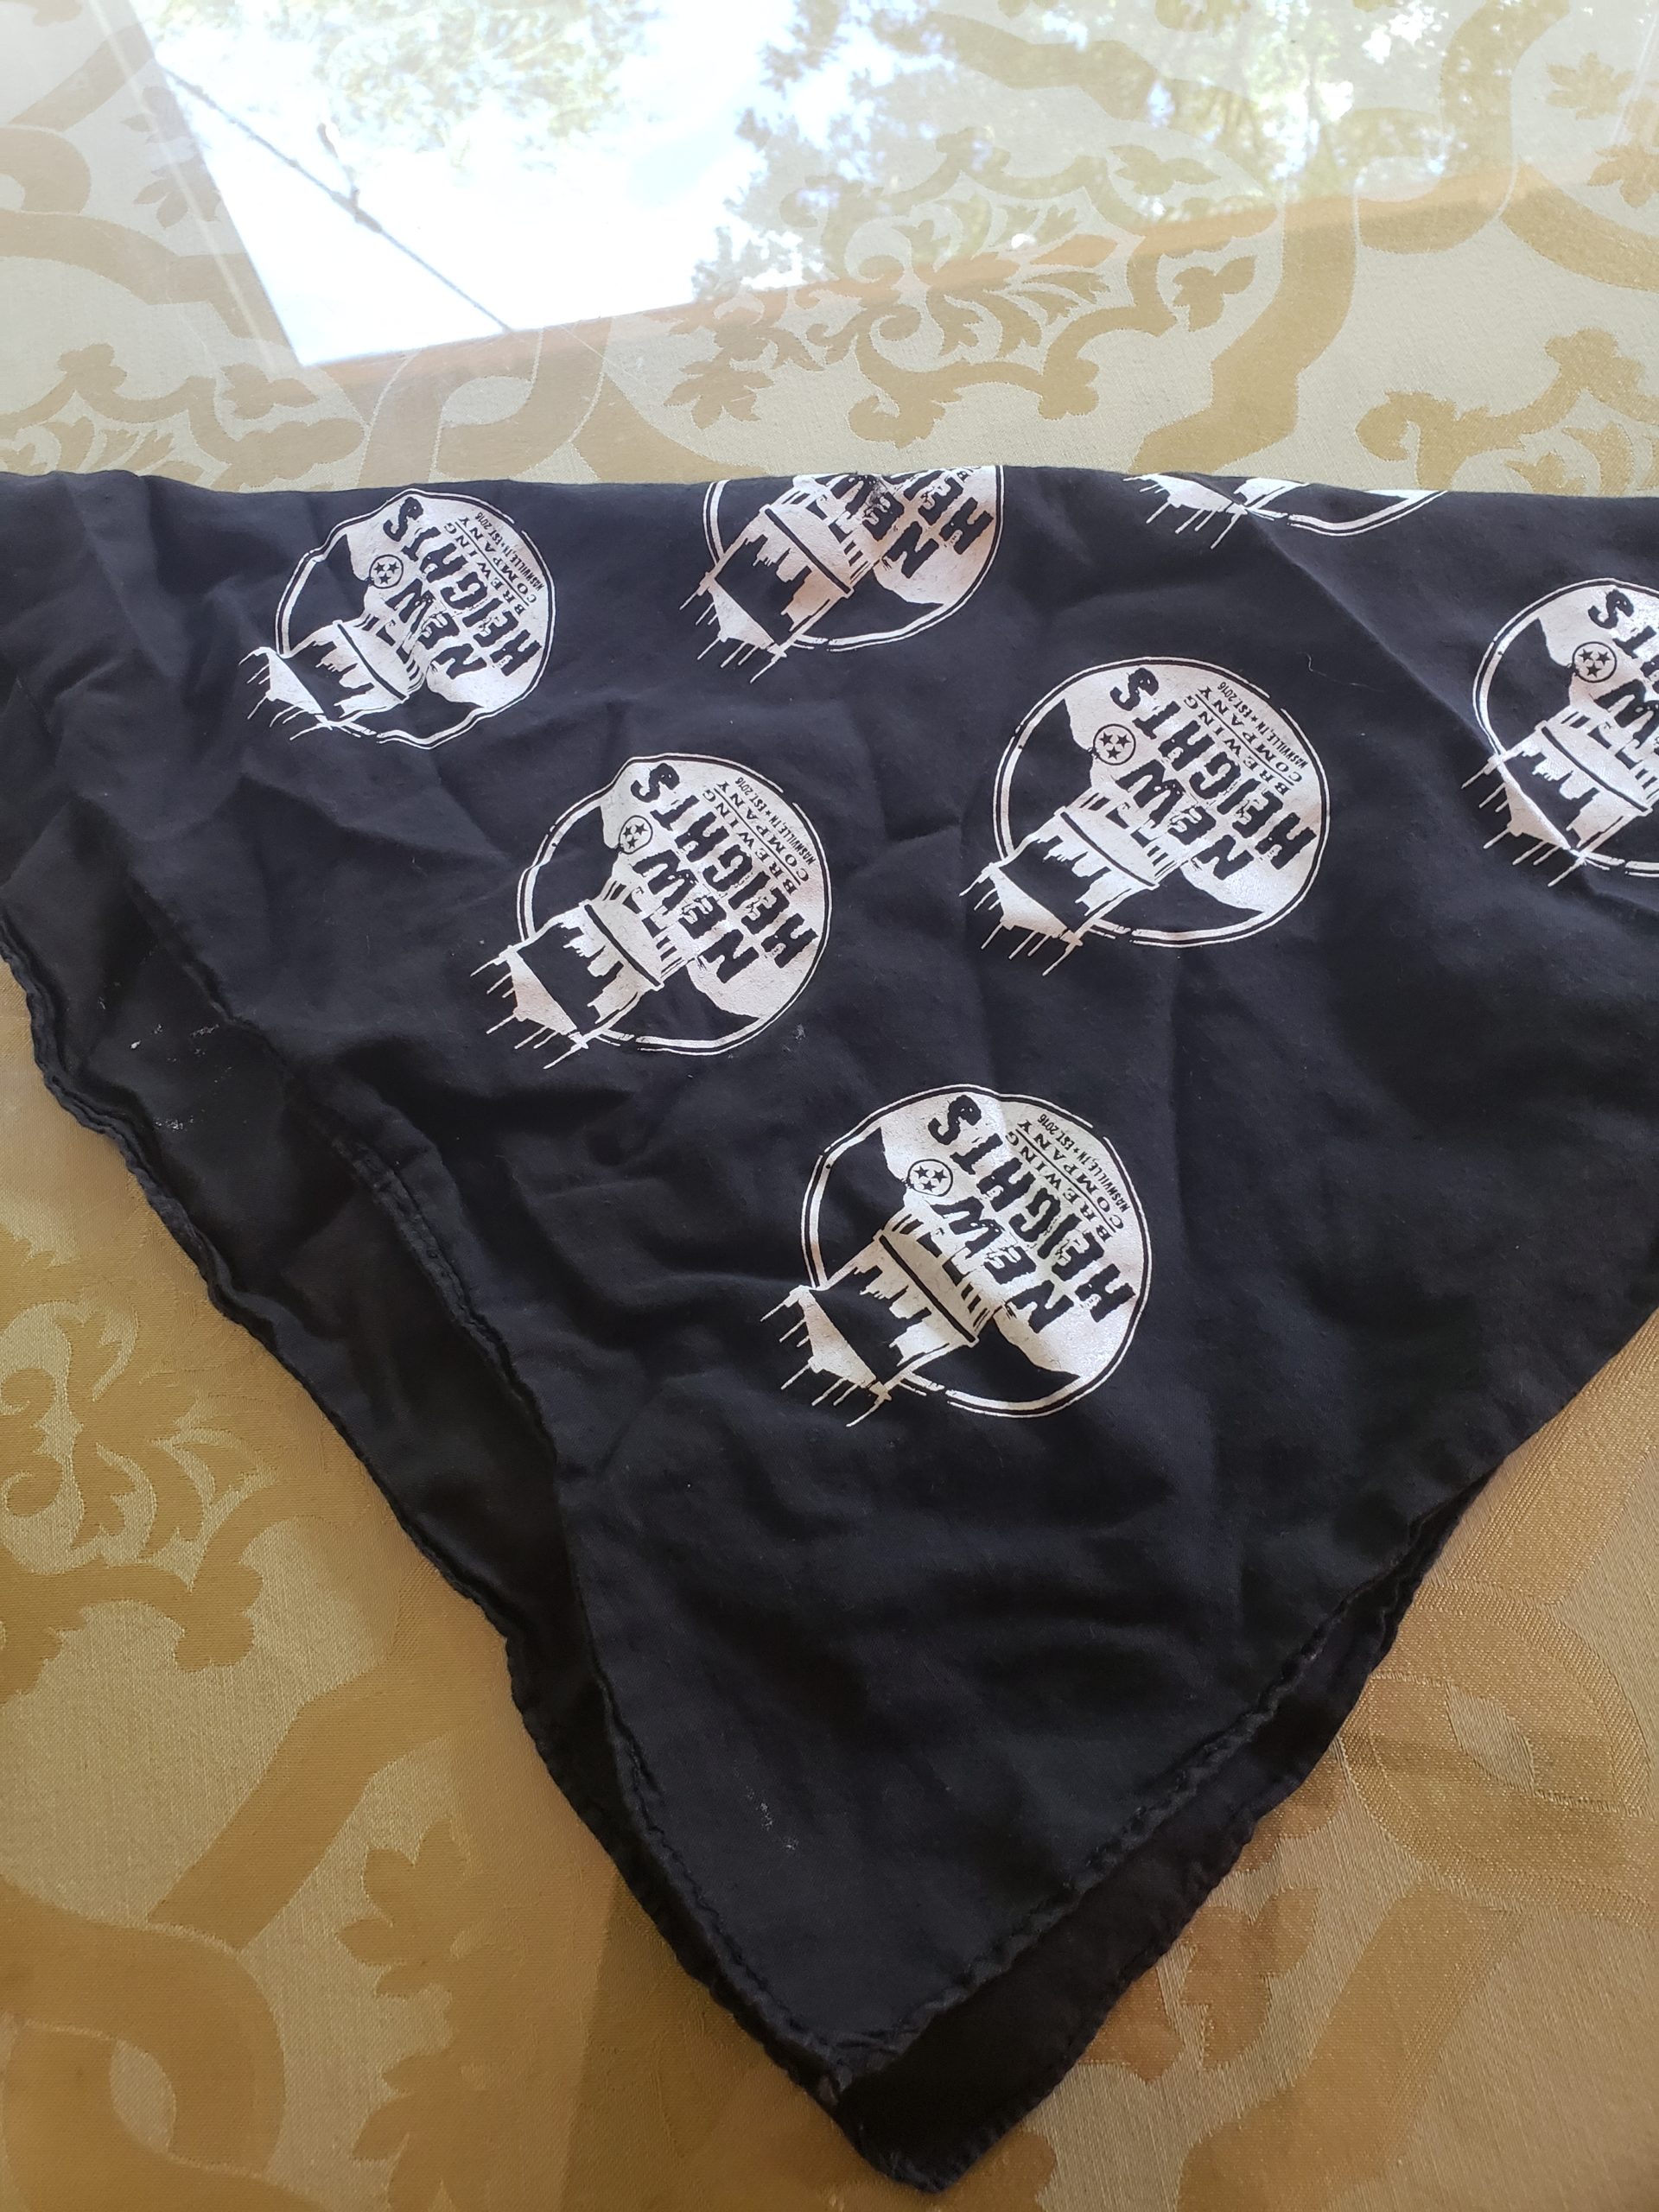 Bandana sold by a local business, May 2020. 